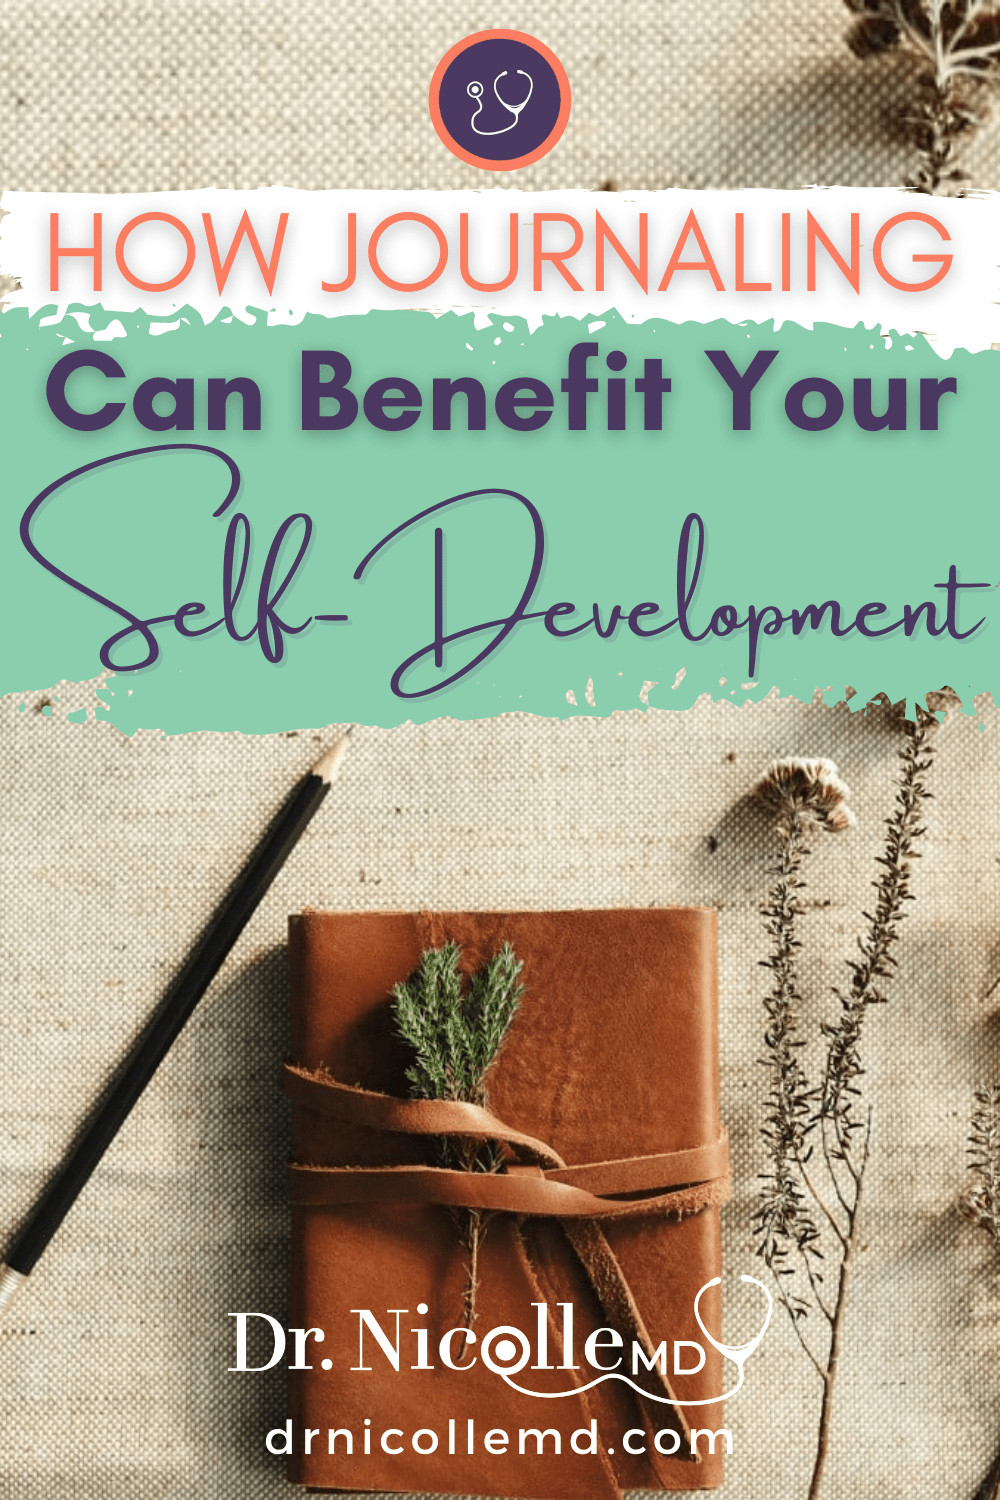 How Journaling Can Benefit Your Self-Development